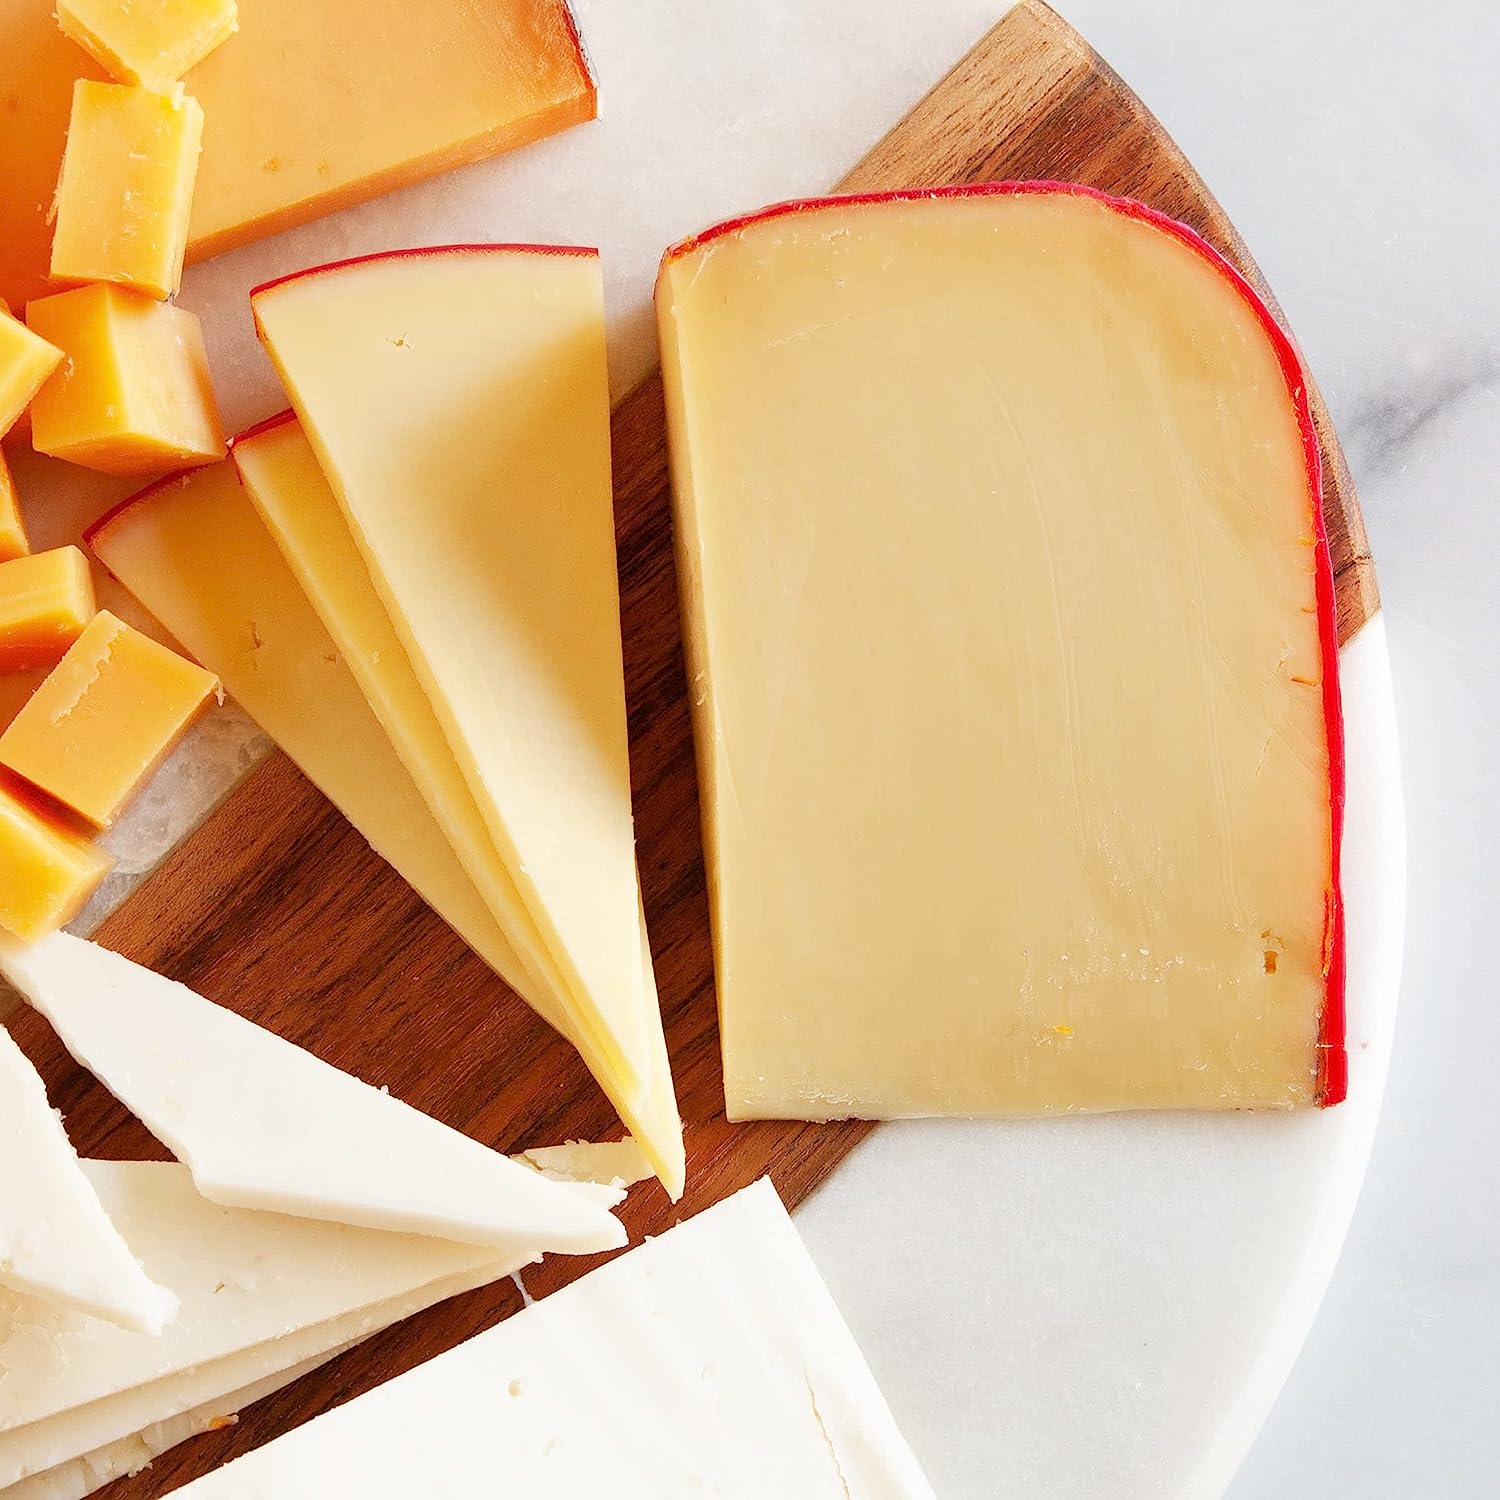 How To Store Gouda Cheese